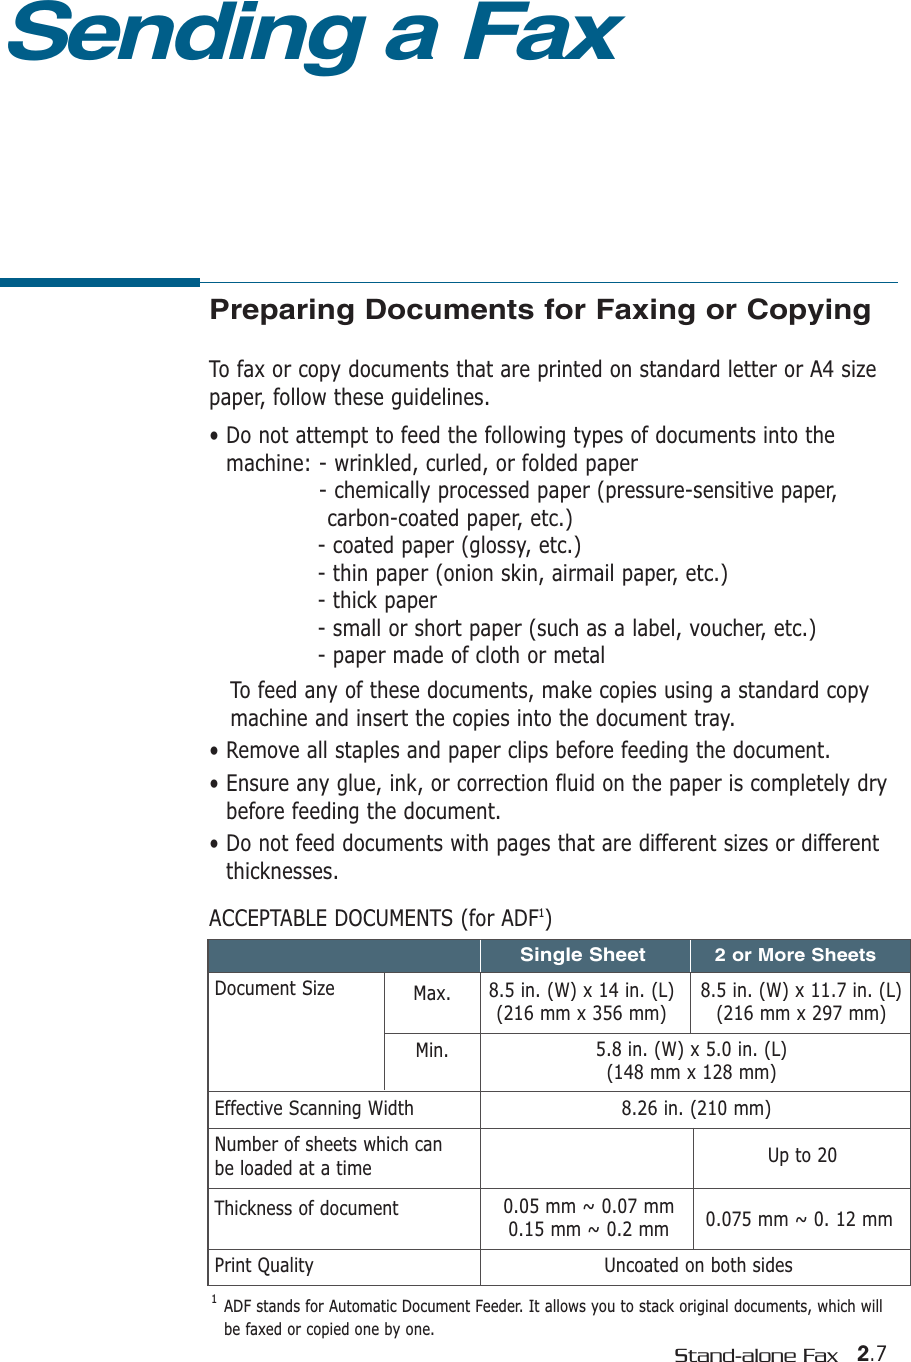 2.7Stand-alone FaxPreparing Documents for Faxing or CopyingTo fax or copy documents that are printed on standard letter or A4 sizepaper, follow these guidelines.• Do not attempt to feed the following types of documents into themachine: - wrinkled, curled, or folded paper- chemically processed paper (pressure-sensitive paper, carbon-coated paper, etc.)- coated paper (glossy, etc.)- thin paper (onion skin, airmail paper, etc.)- thick paper - small or short paper (such as a label, voucher, etc.)- paper made of cloth or metalTo feed any of these documents, make copies using a standard copymachine and insert the copies into the document tray.• Remove all staples and paper clips before feeding the document.• Ensure any glue, ink, or correction fluid on the paper is completely drybefore feeding the document.• Do not feed documents with pages that are different sizes or differentthicknesses.ACCEPTABLE DOCUMENTS (for ADF1)Sending a FaxEffective Scanning WidthNumber of sheets which can be loaded at a timeThickness of documentPrint QualityDocument Size Max.Min.8.5 in. (W) x 11.7 in. (L)(216 mm x 297 mm)8.5 in. (W) x 14 in. (L)(216 mm x 356 mm)5.8 in. (W) x 5.0 in. (L)(148 mm x 128 mm)8.26 in. (210 mm)Uncoated on both sidesUp to 200.05 mm ~ 0.07 mm0.15 mm ~ 0.2 mm 0.075 mm ~ 0. 12 mmSingle Sheet2 or More Sheets1  ADF stands for Automatic Document Feeder. It allows you to stack original documents, which willbe faxed or copied one by one.